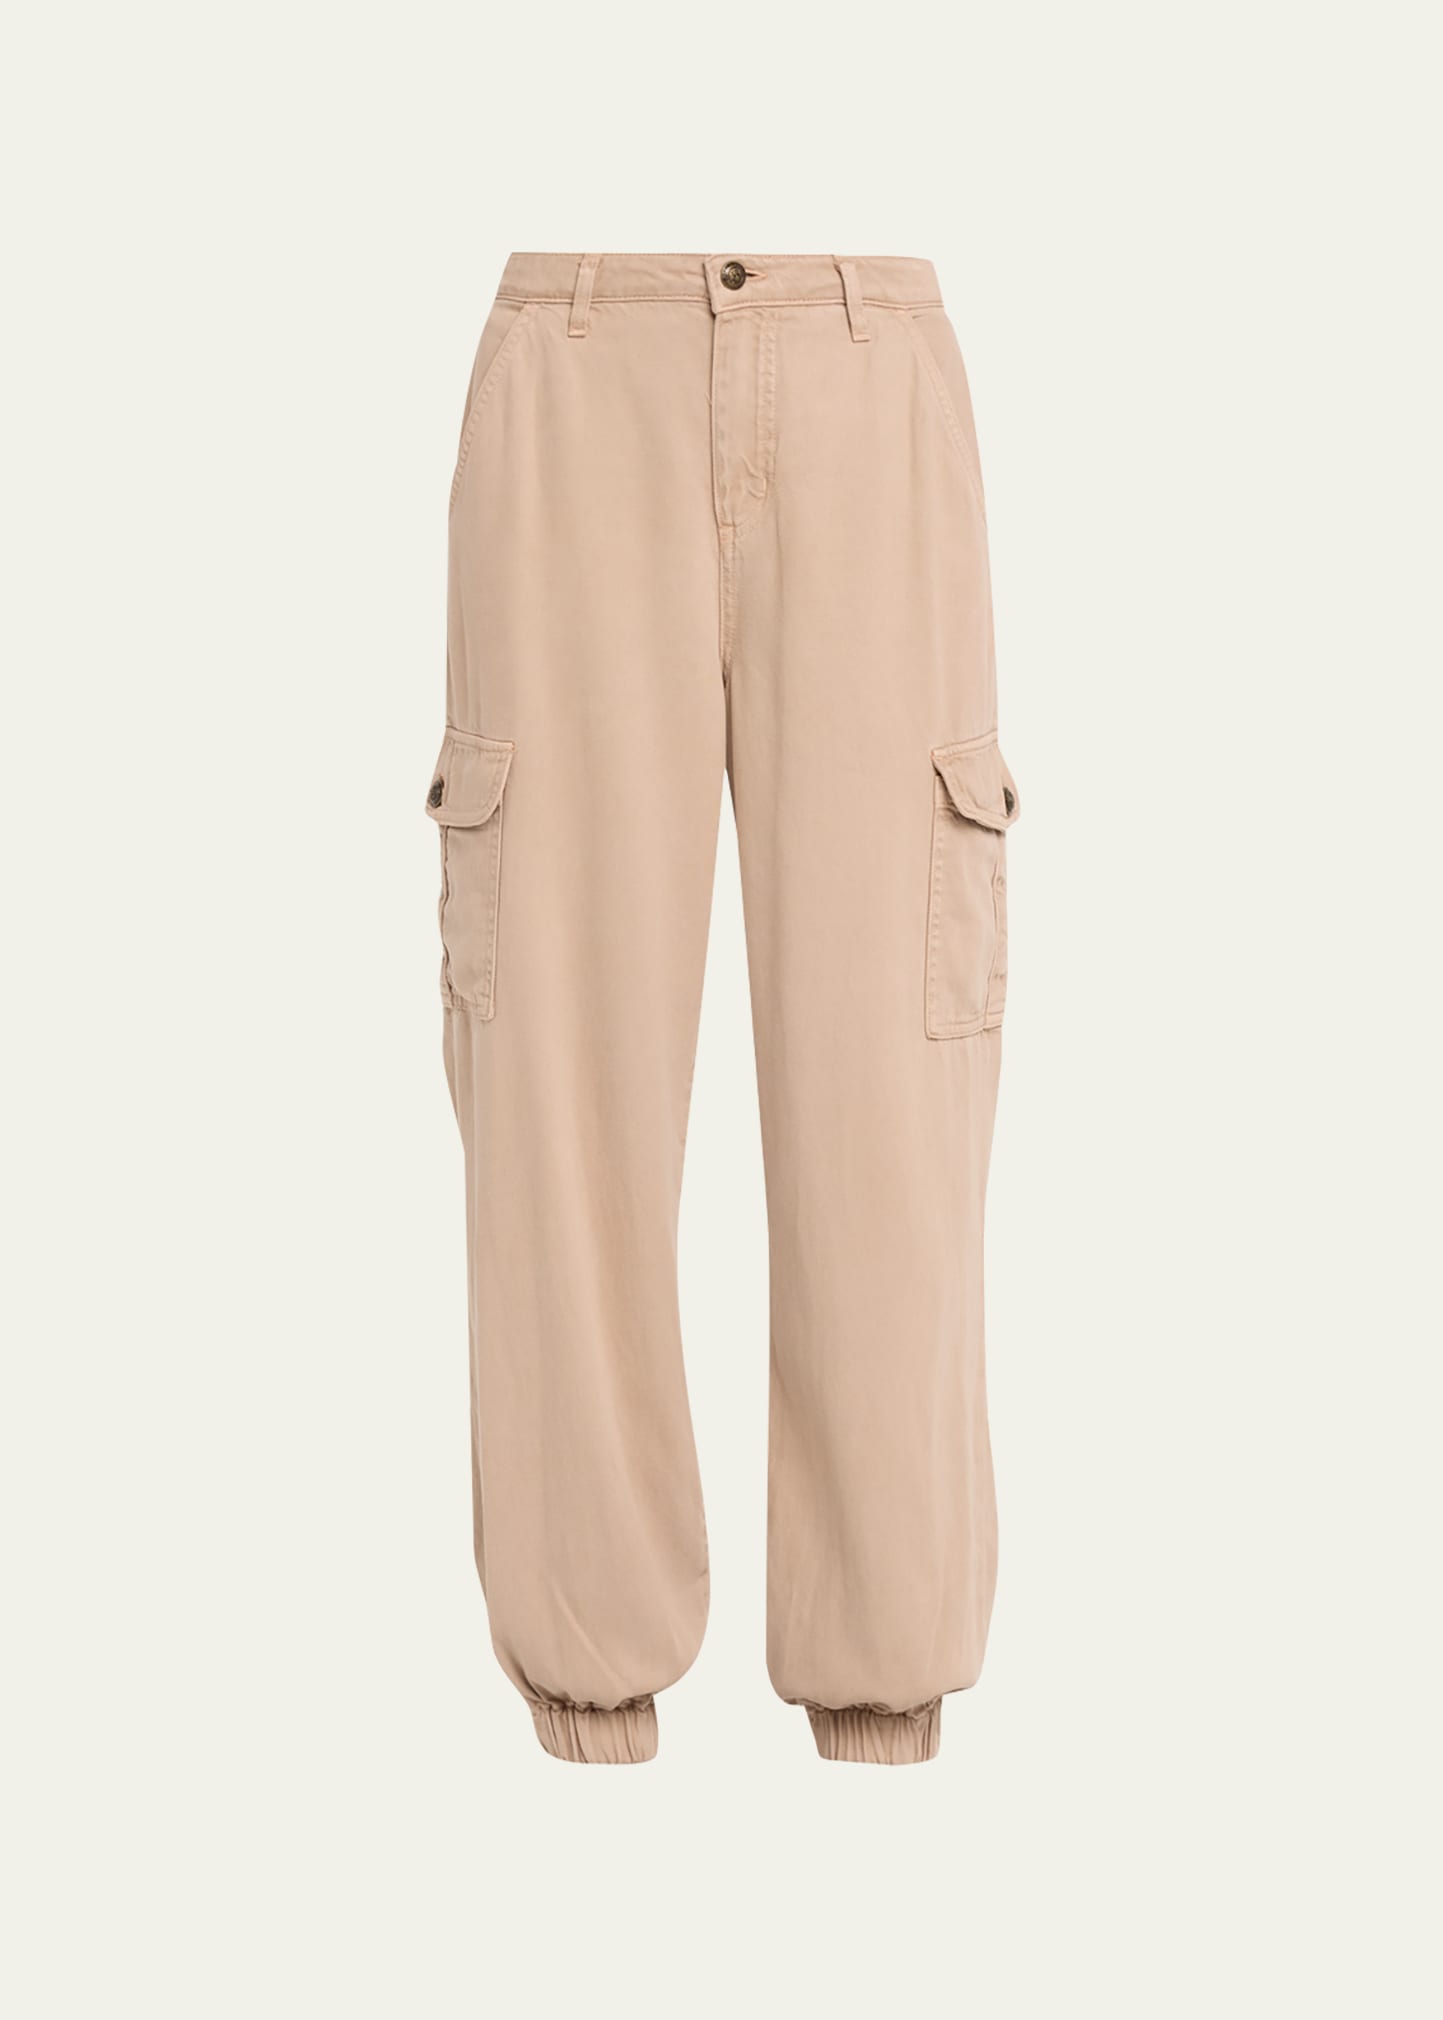 L AGENCE RUSSO HIGH RISE CROPPED UTILITY PANTS